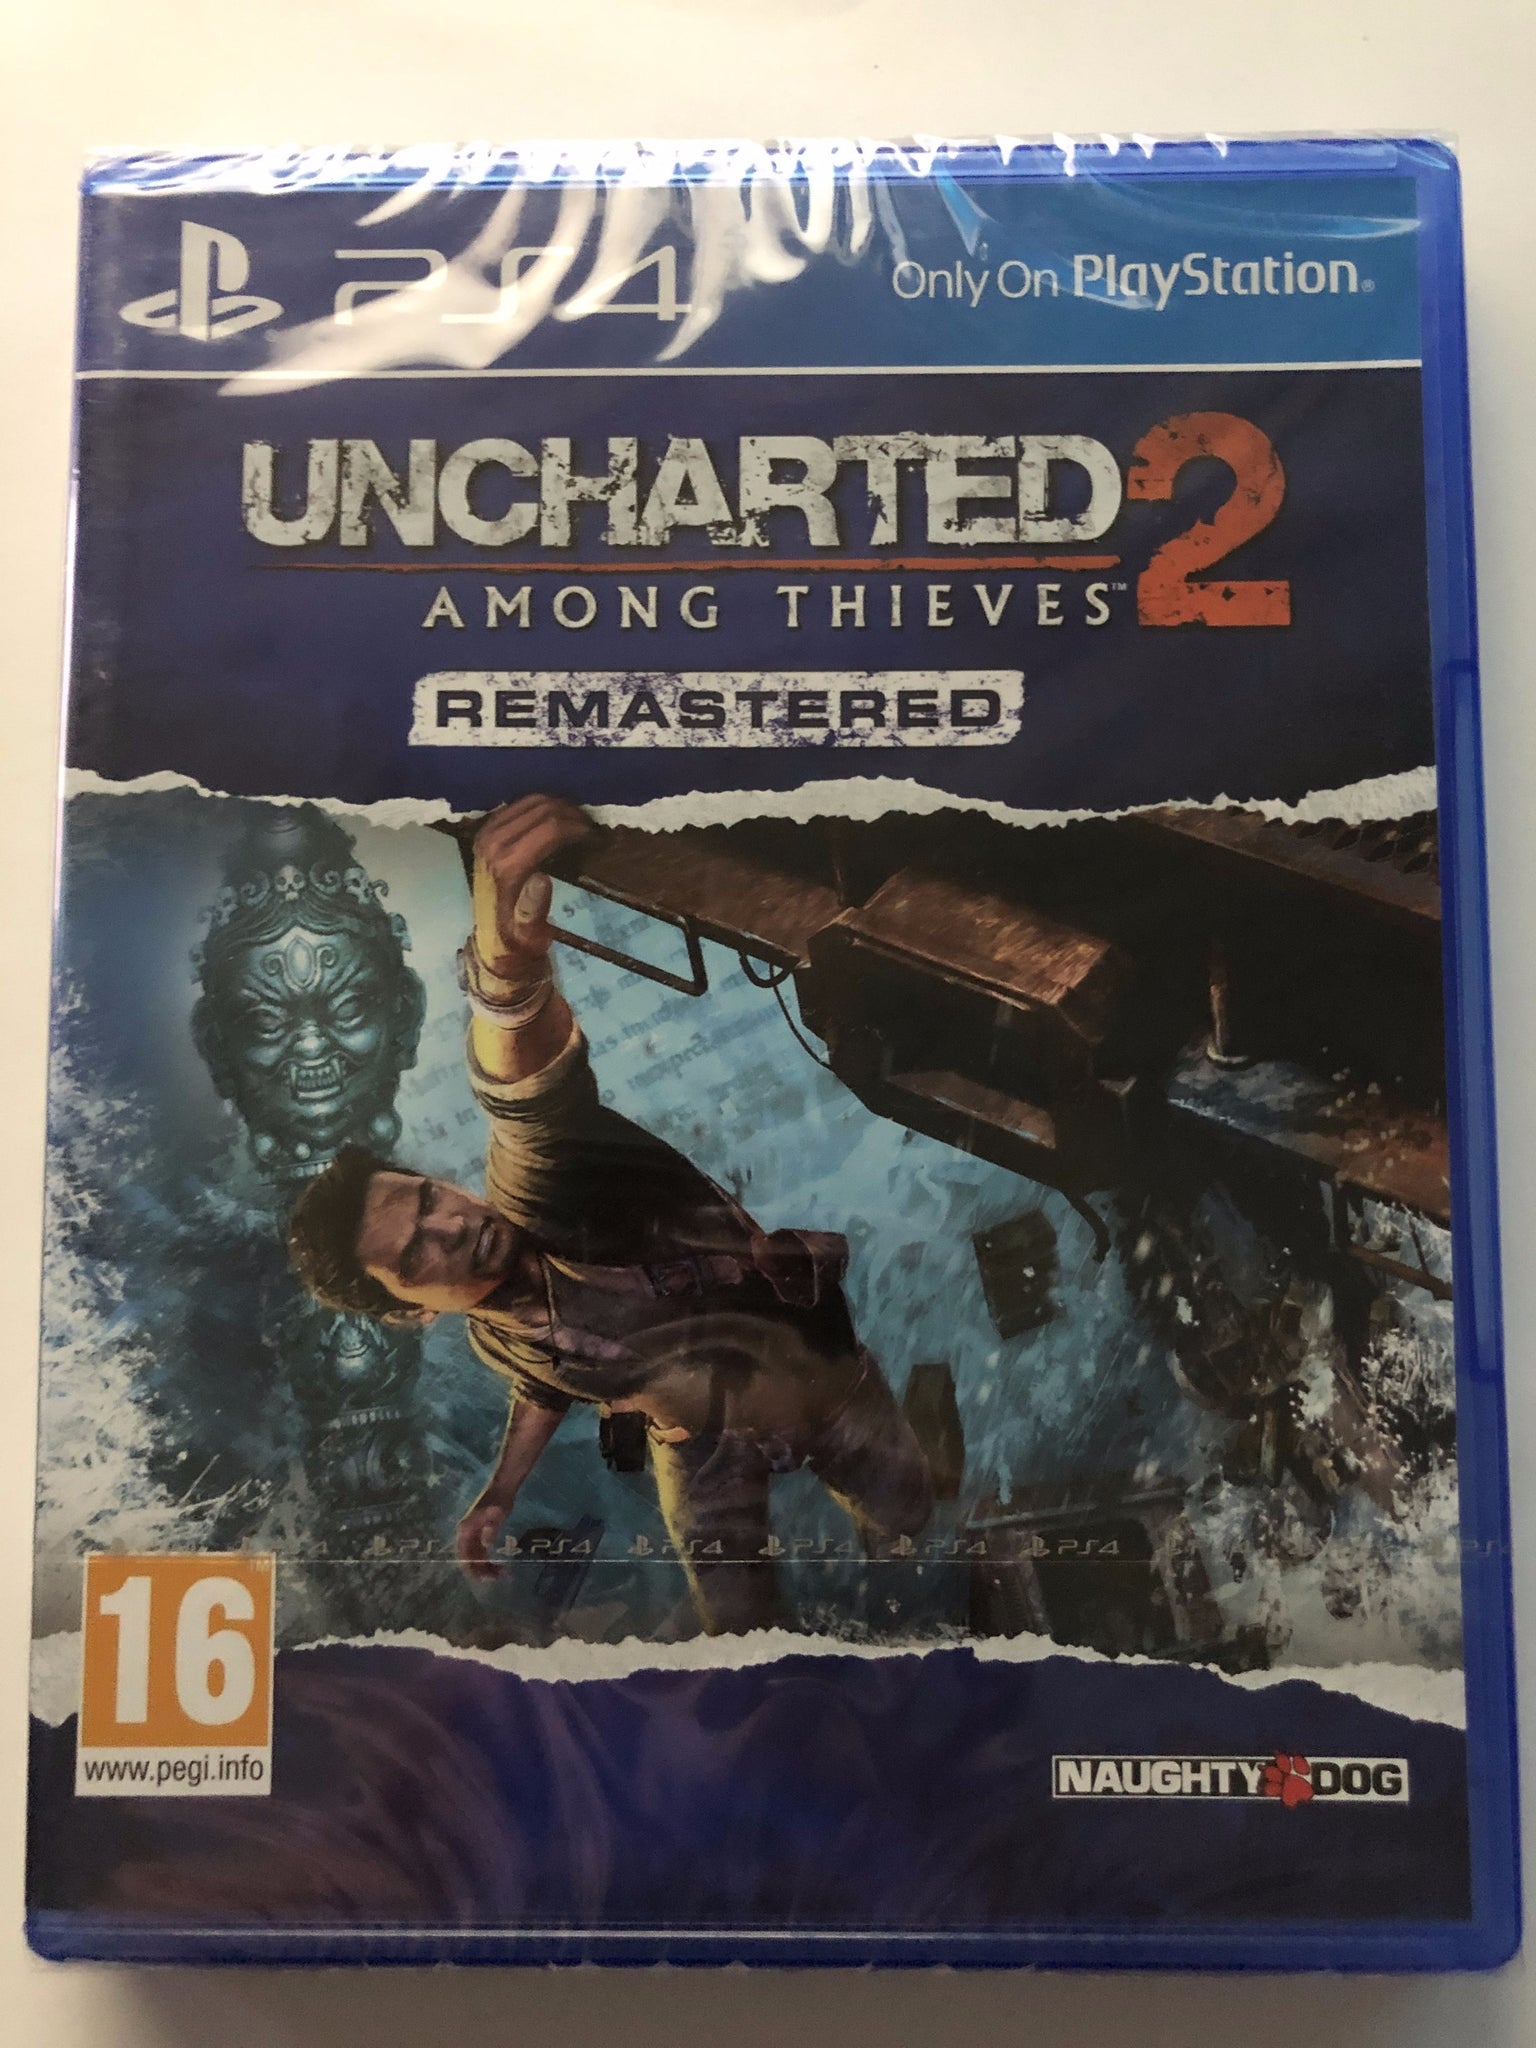 Análise de Uncharted 2: Among Thieves